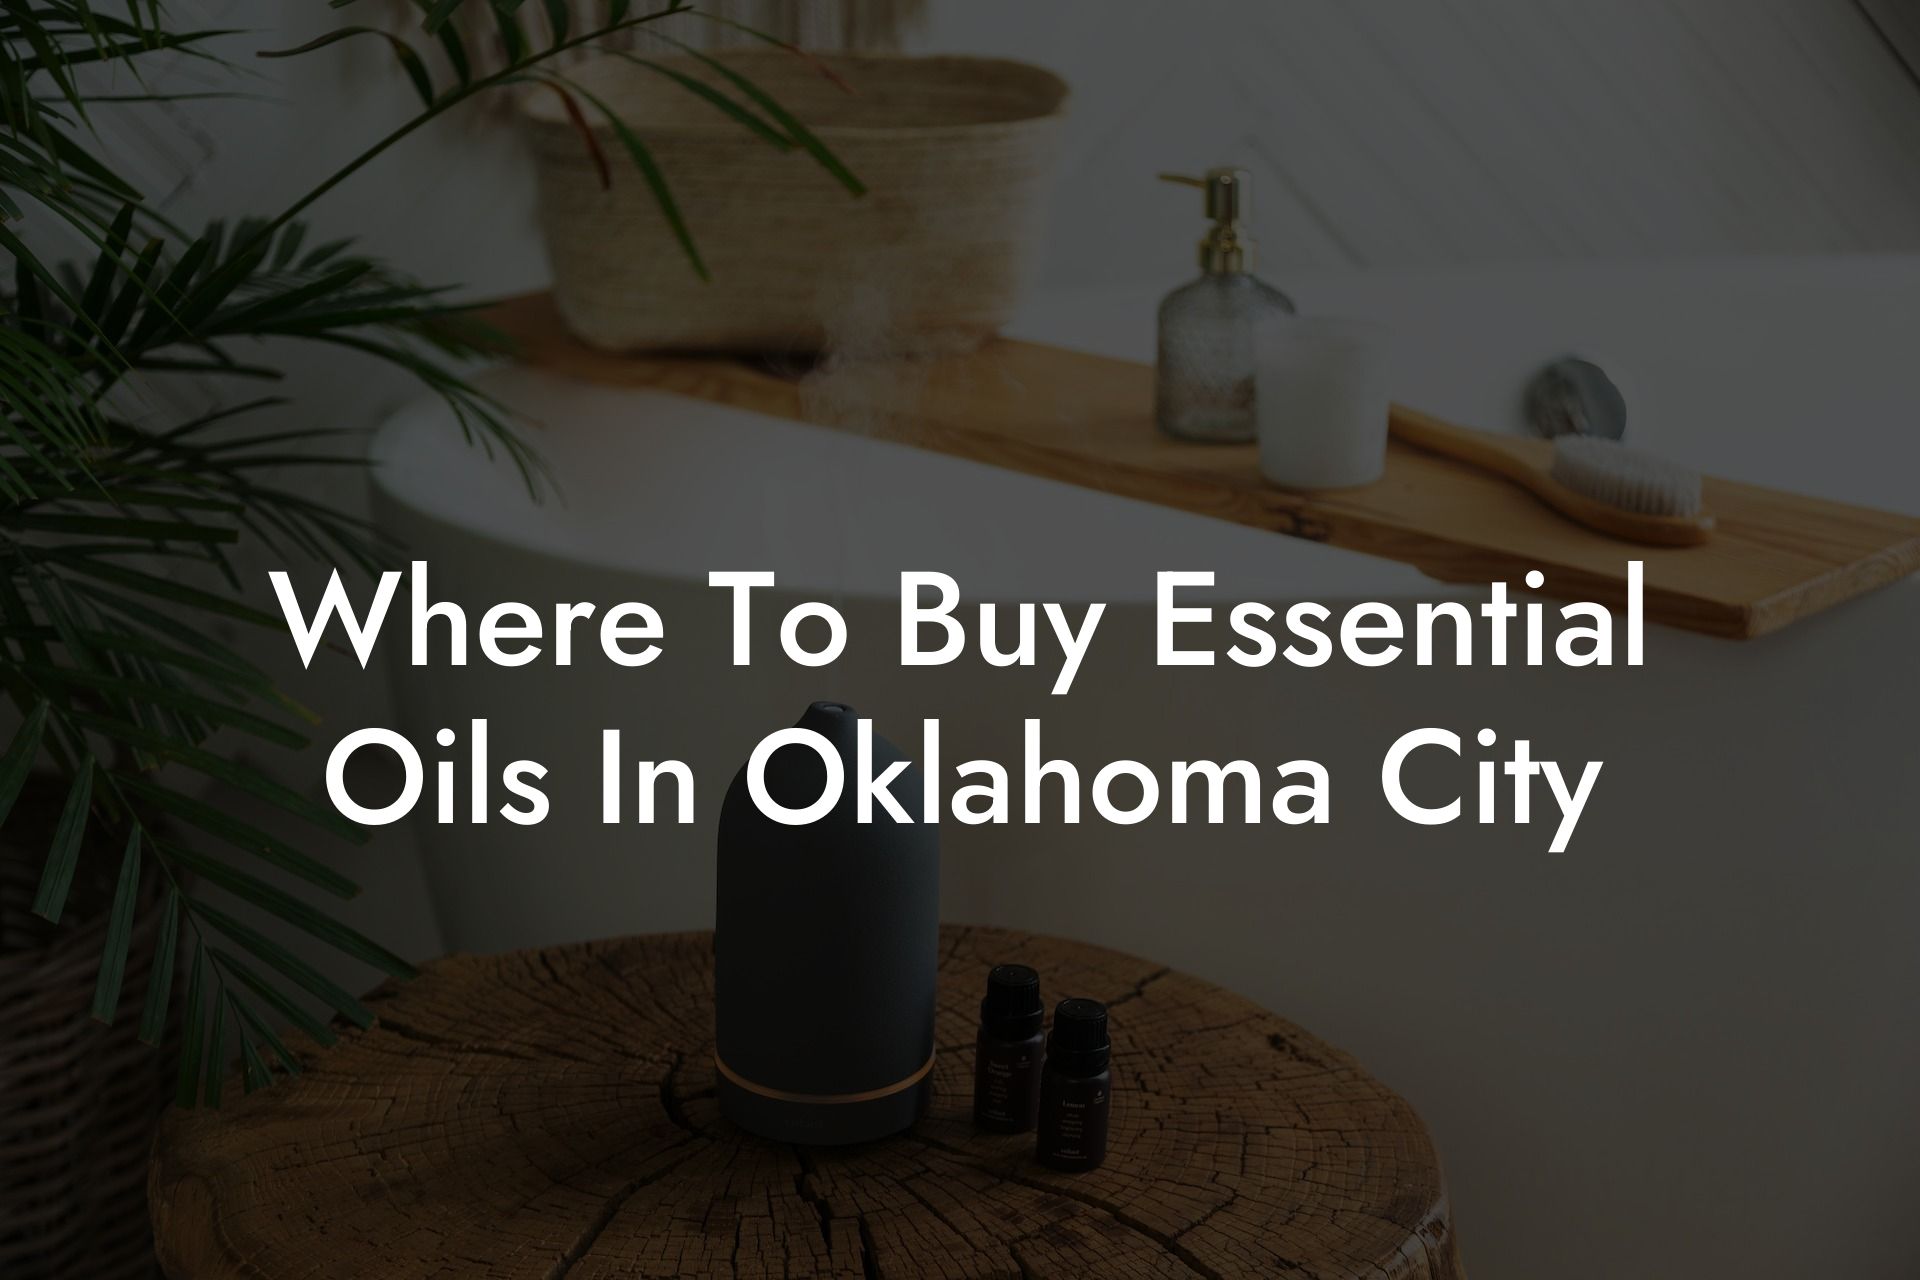 Where To Buy Essential Oils In Oklahoma City